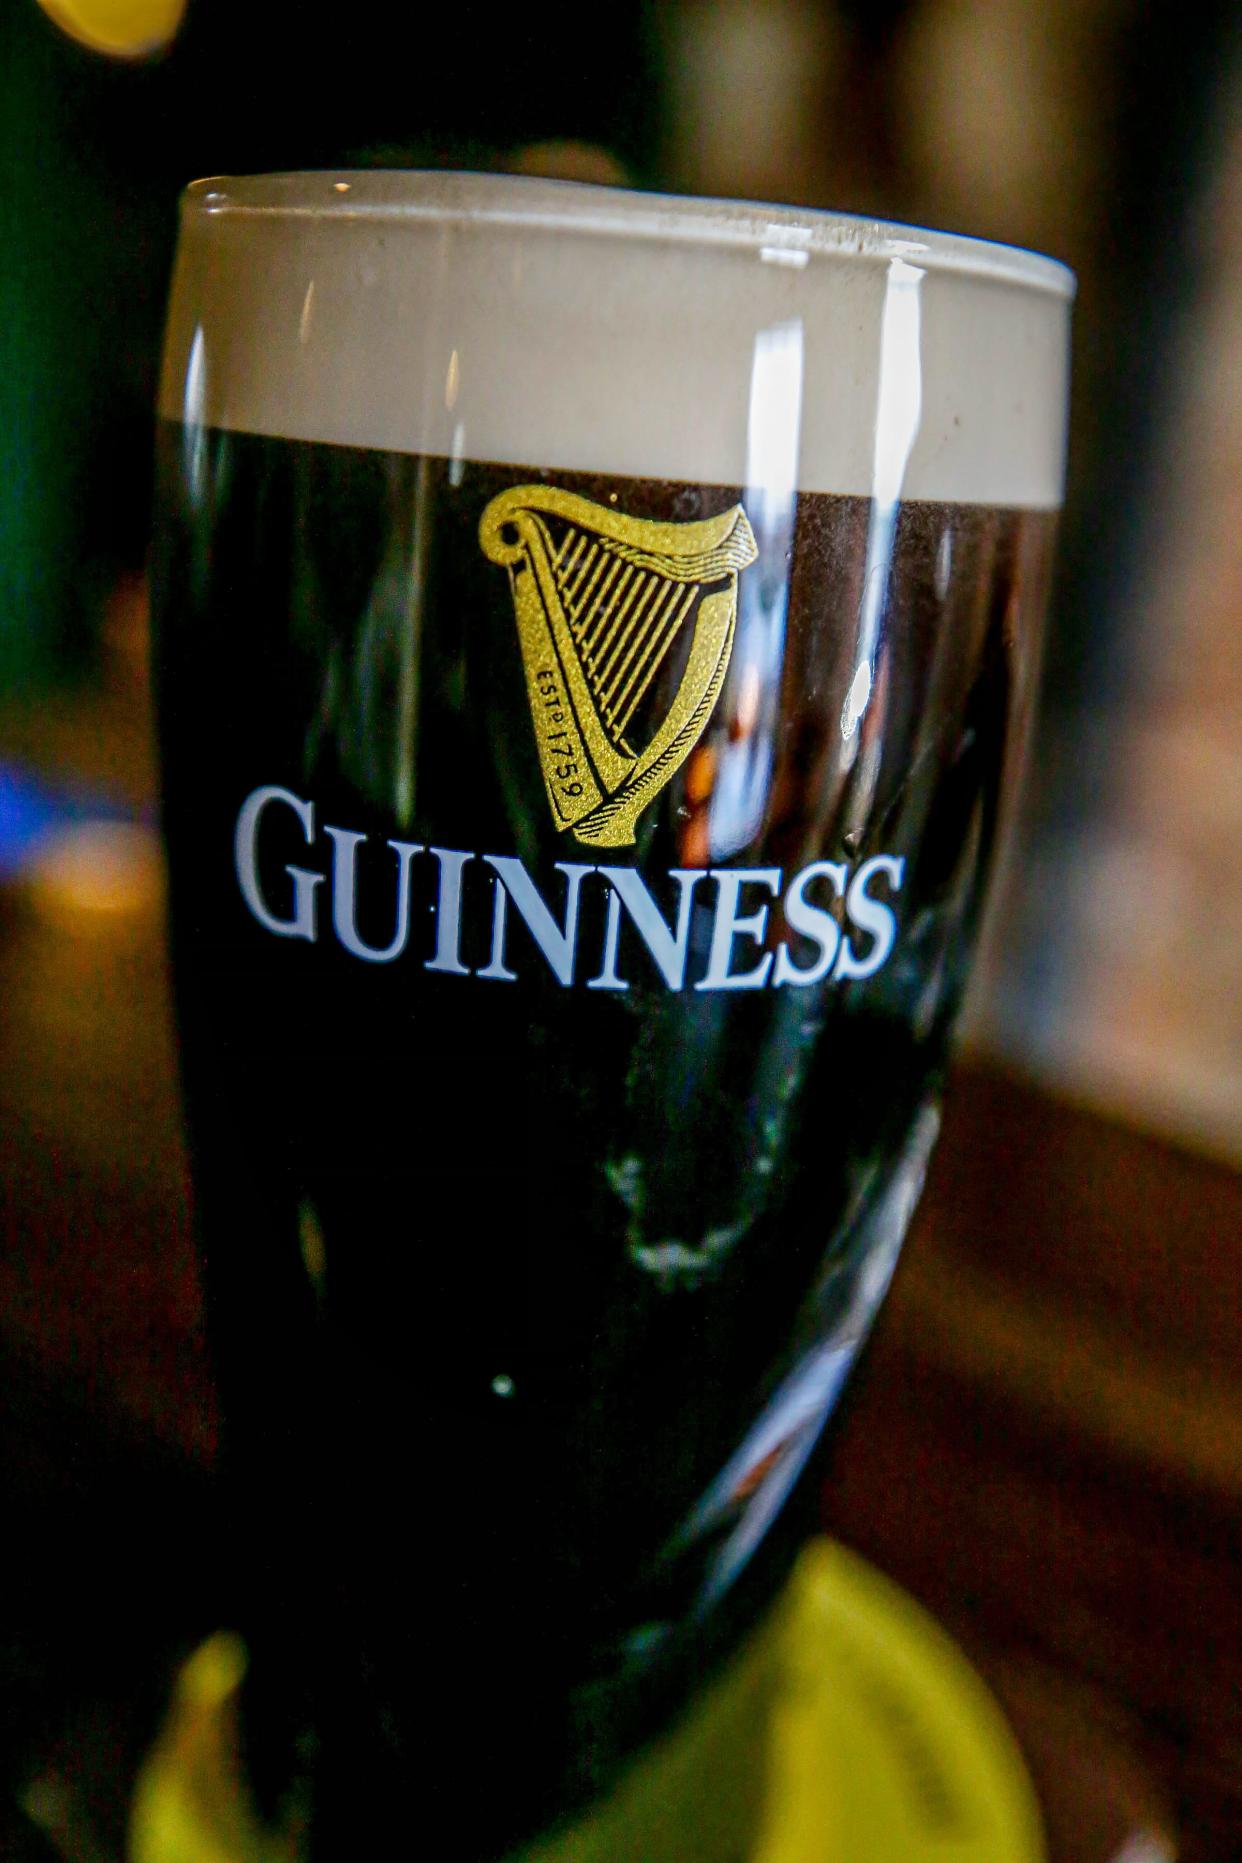 A correct Guinness pour should have the creamy head beginning at the top of the harp with the foam slightly rising over top of pint.